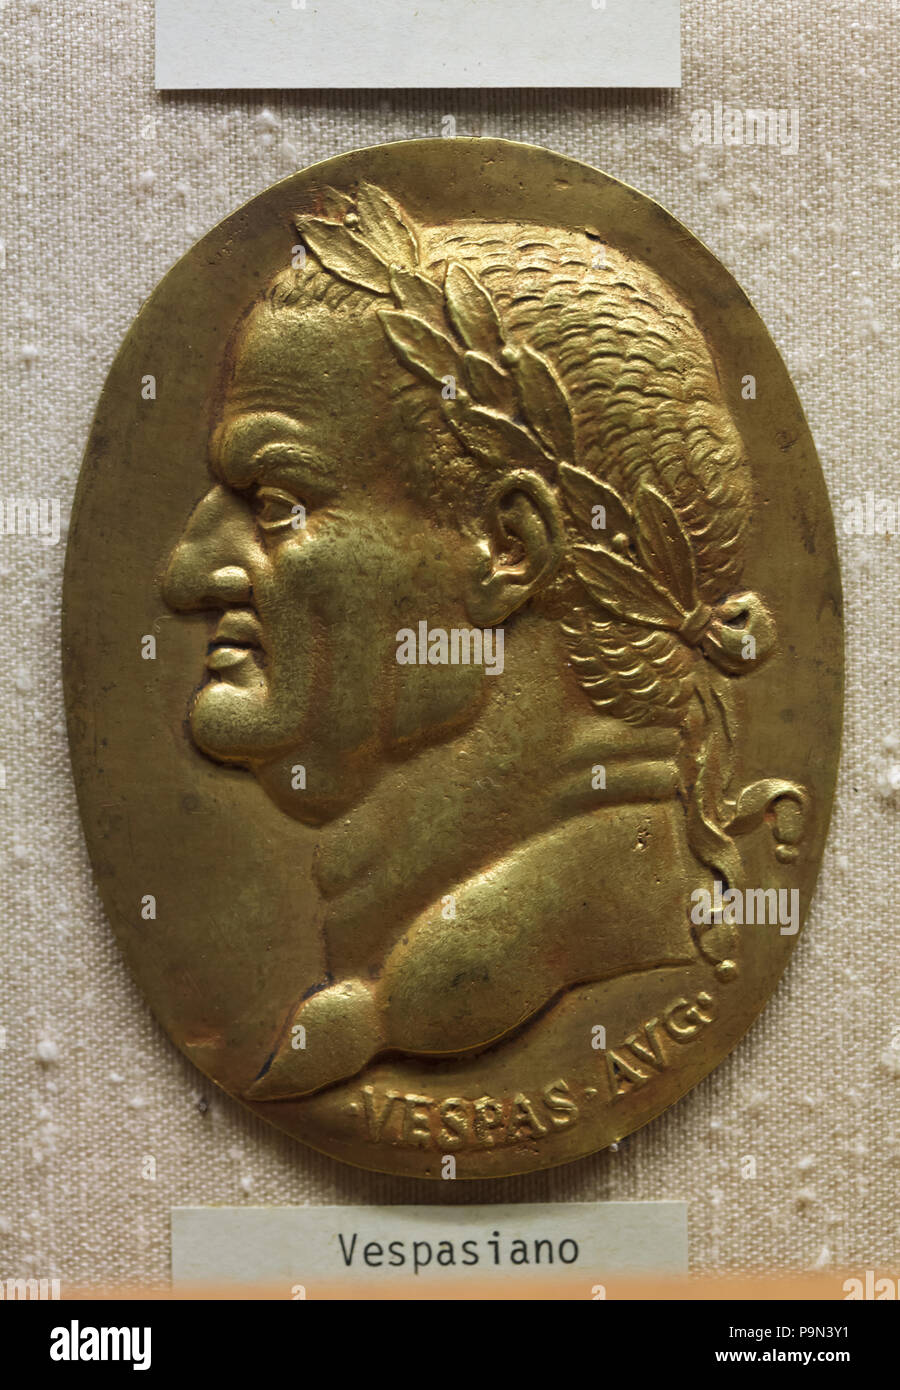 Roman Emperor Vespasian (reigned 69-79 AD) depicted in the Italian Renaissance bronze plaque from the 16th century on display in the Bargello Museum (Museo Nazionale del Bargello) in Florence, Tuscany, Italy. Stock Photo